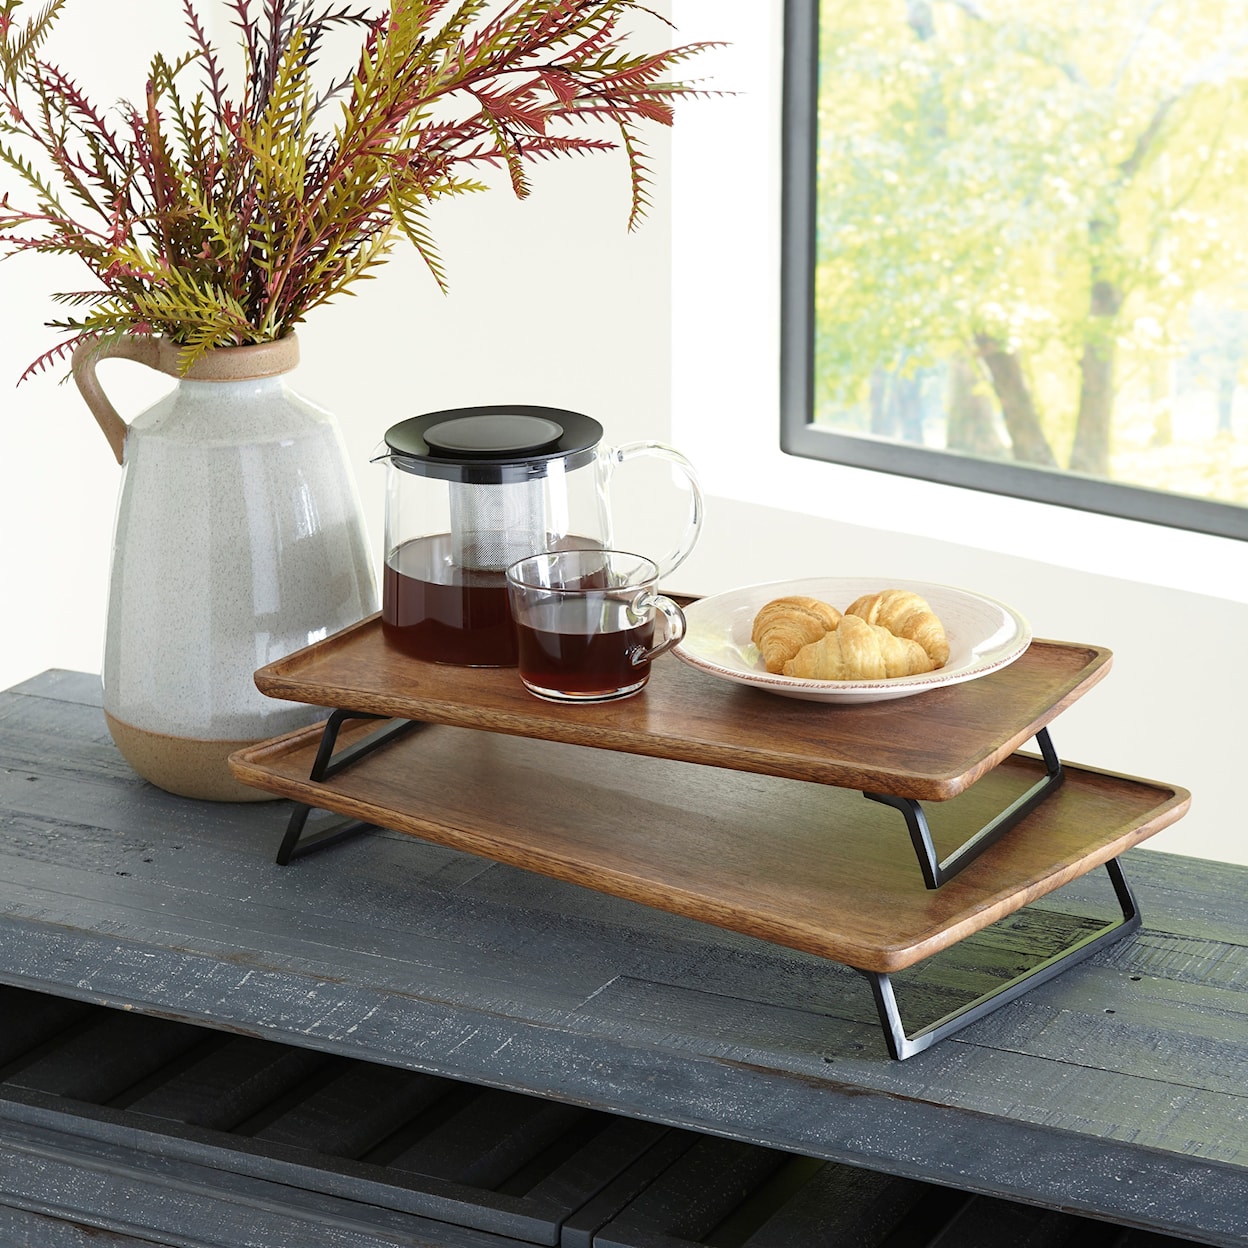 Signature Design by Ashley Accents Kaleena Brown/Black Tray Set